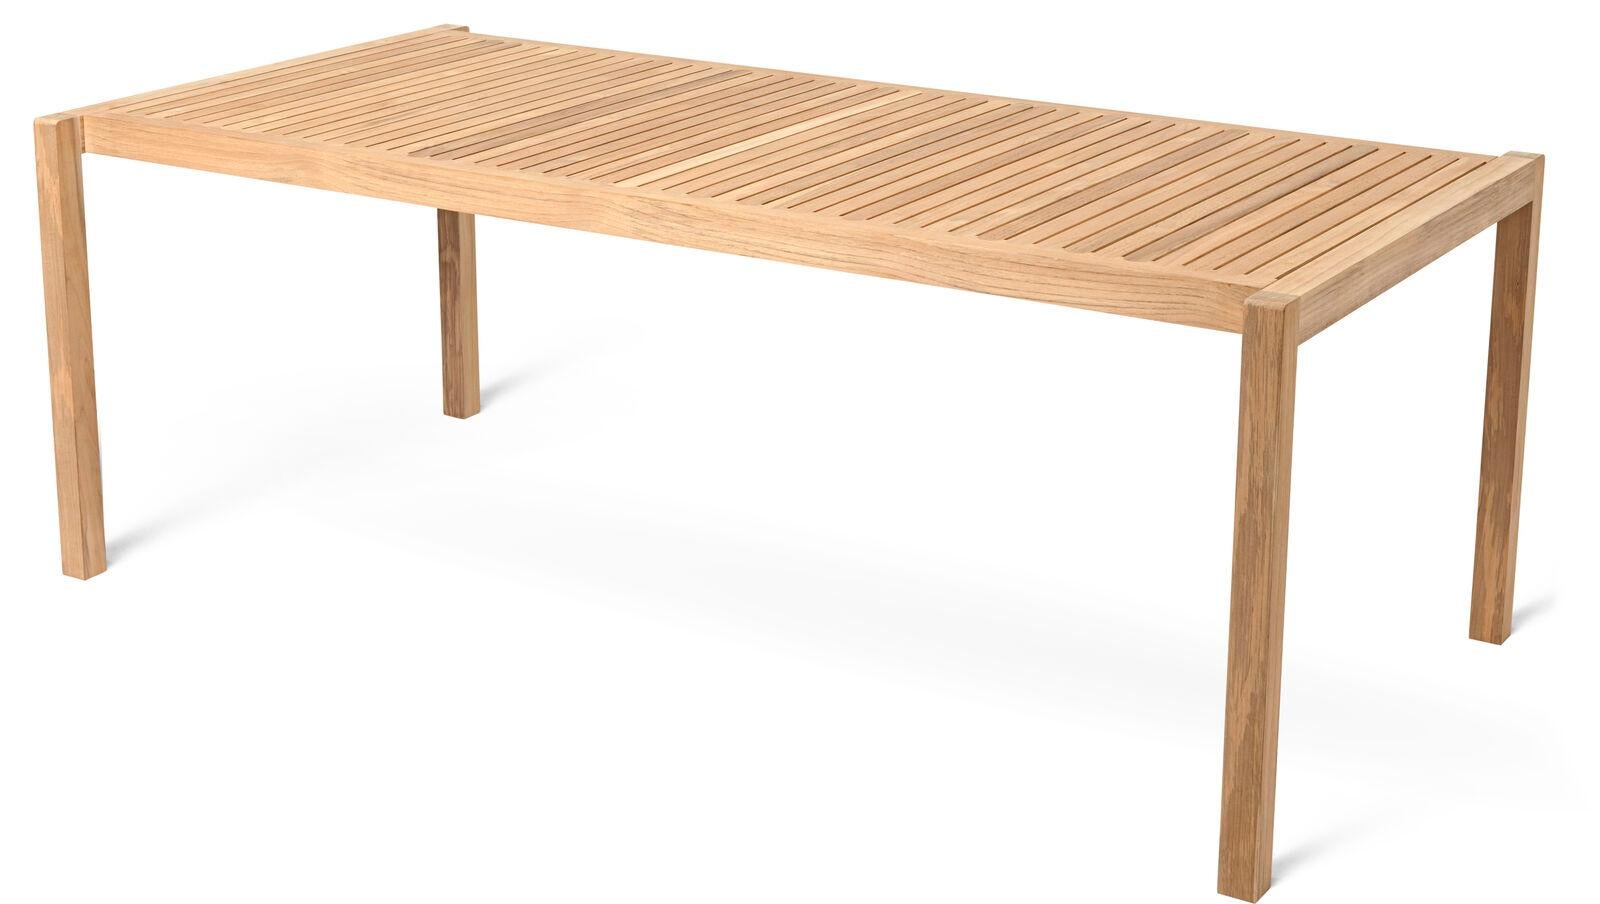 The AH901 Outdoor Dining table was designed by Alfred Homann in 2022 as part of the AH Outdoor series, characterized by strict lines elegantly united with soft, rounded details. Like the rest of the series, the table is made of FSC-certified teak, a